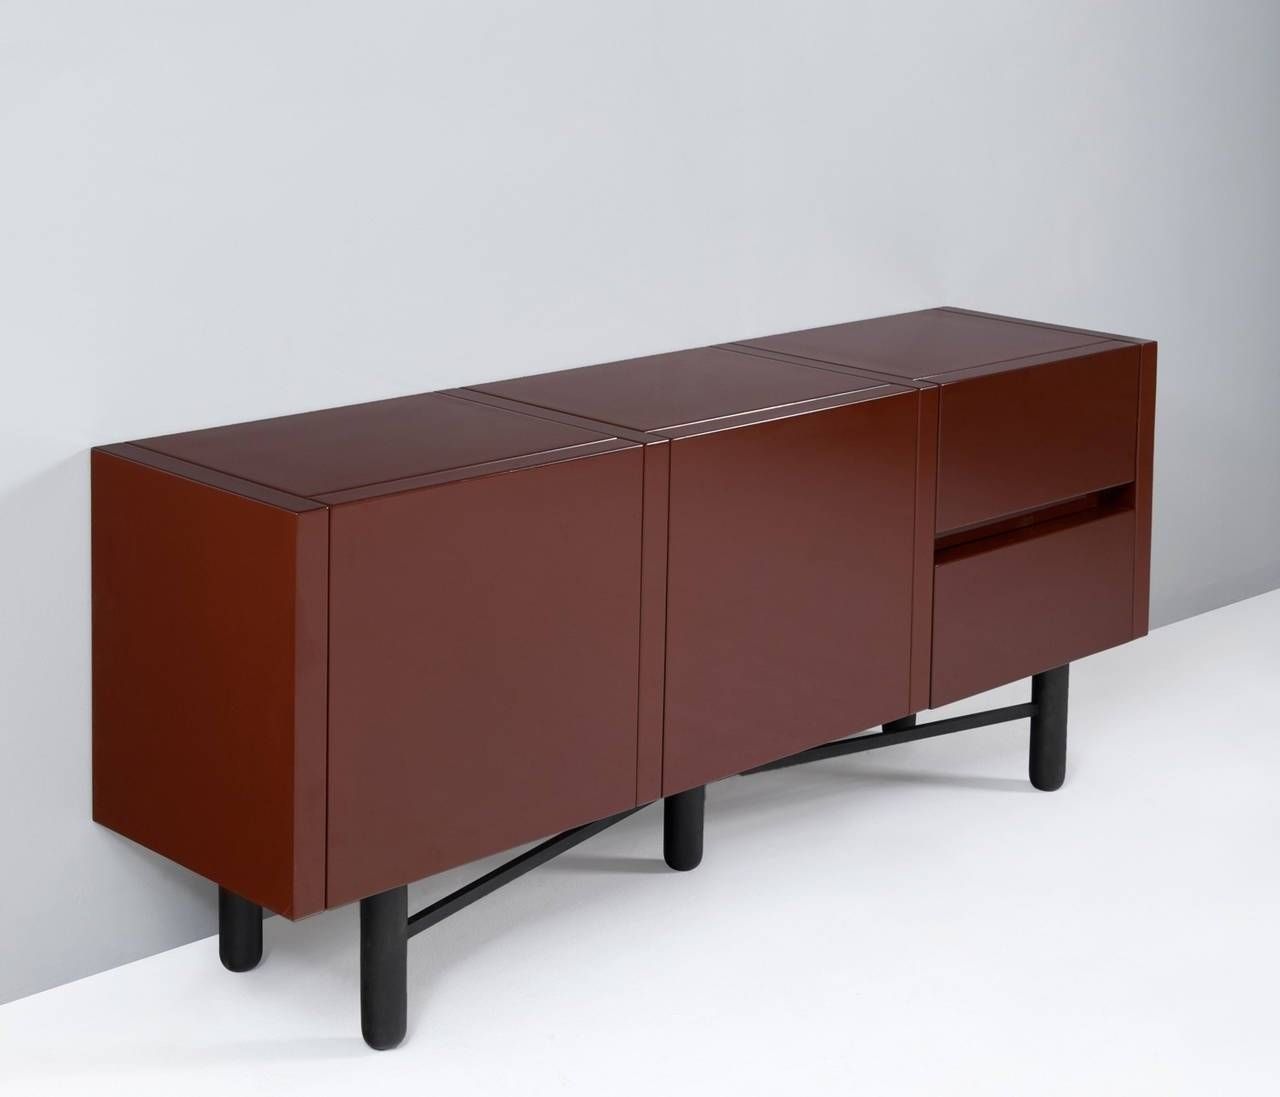 Roche Bobois Red Lacquered High Gloss Sideboard For Sale At 1stdibs Intended For High Gloss Grey Sideboards (View 15 of 15)